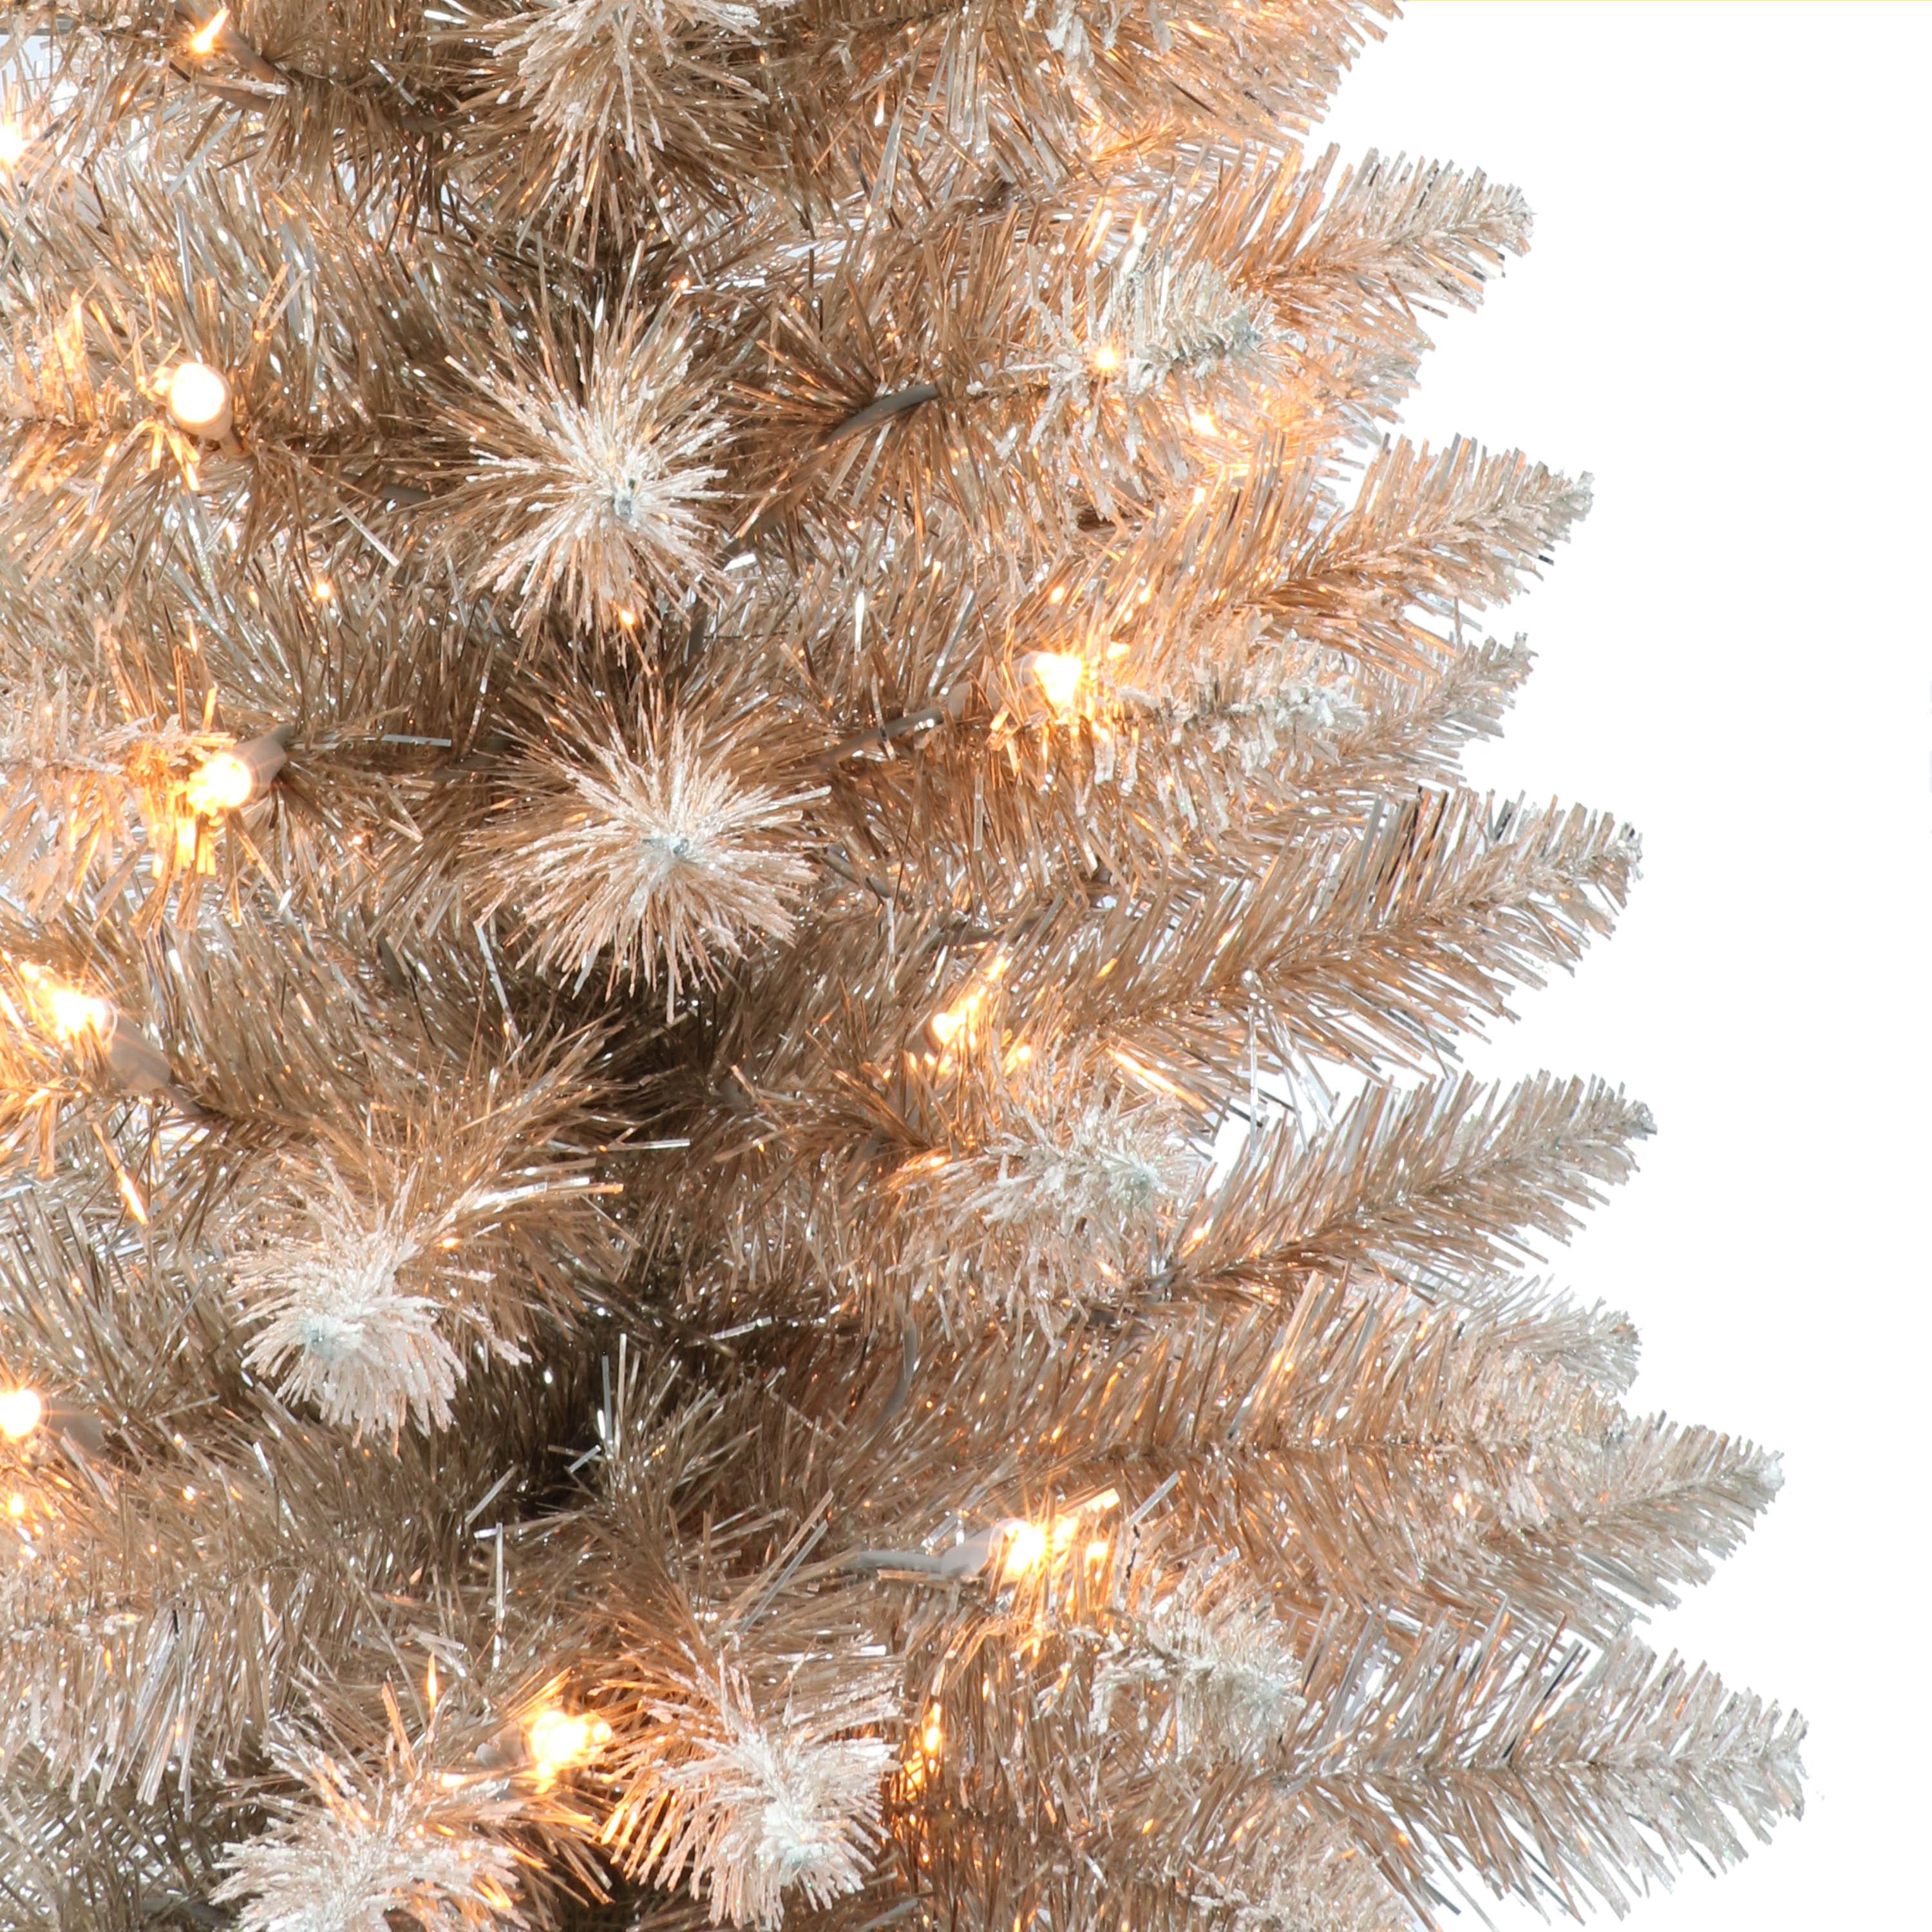 3ft. Pre-Lit Rose Gold Artificial Christmas Tree